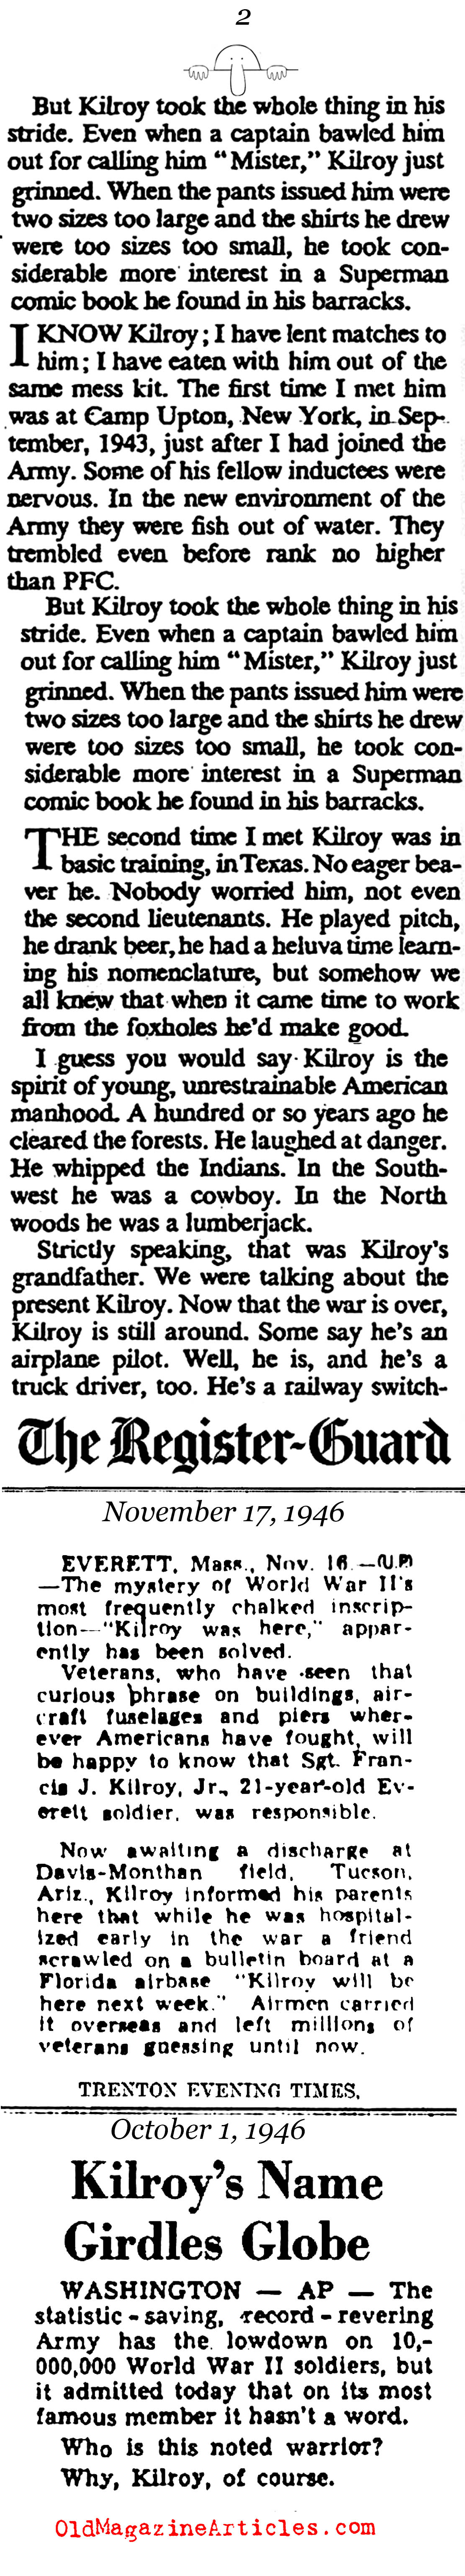 Who was Kilroy? (Various Sources, 1945 -7)